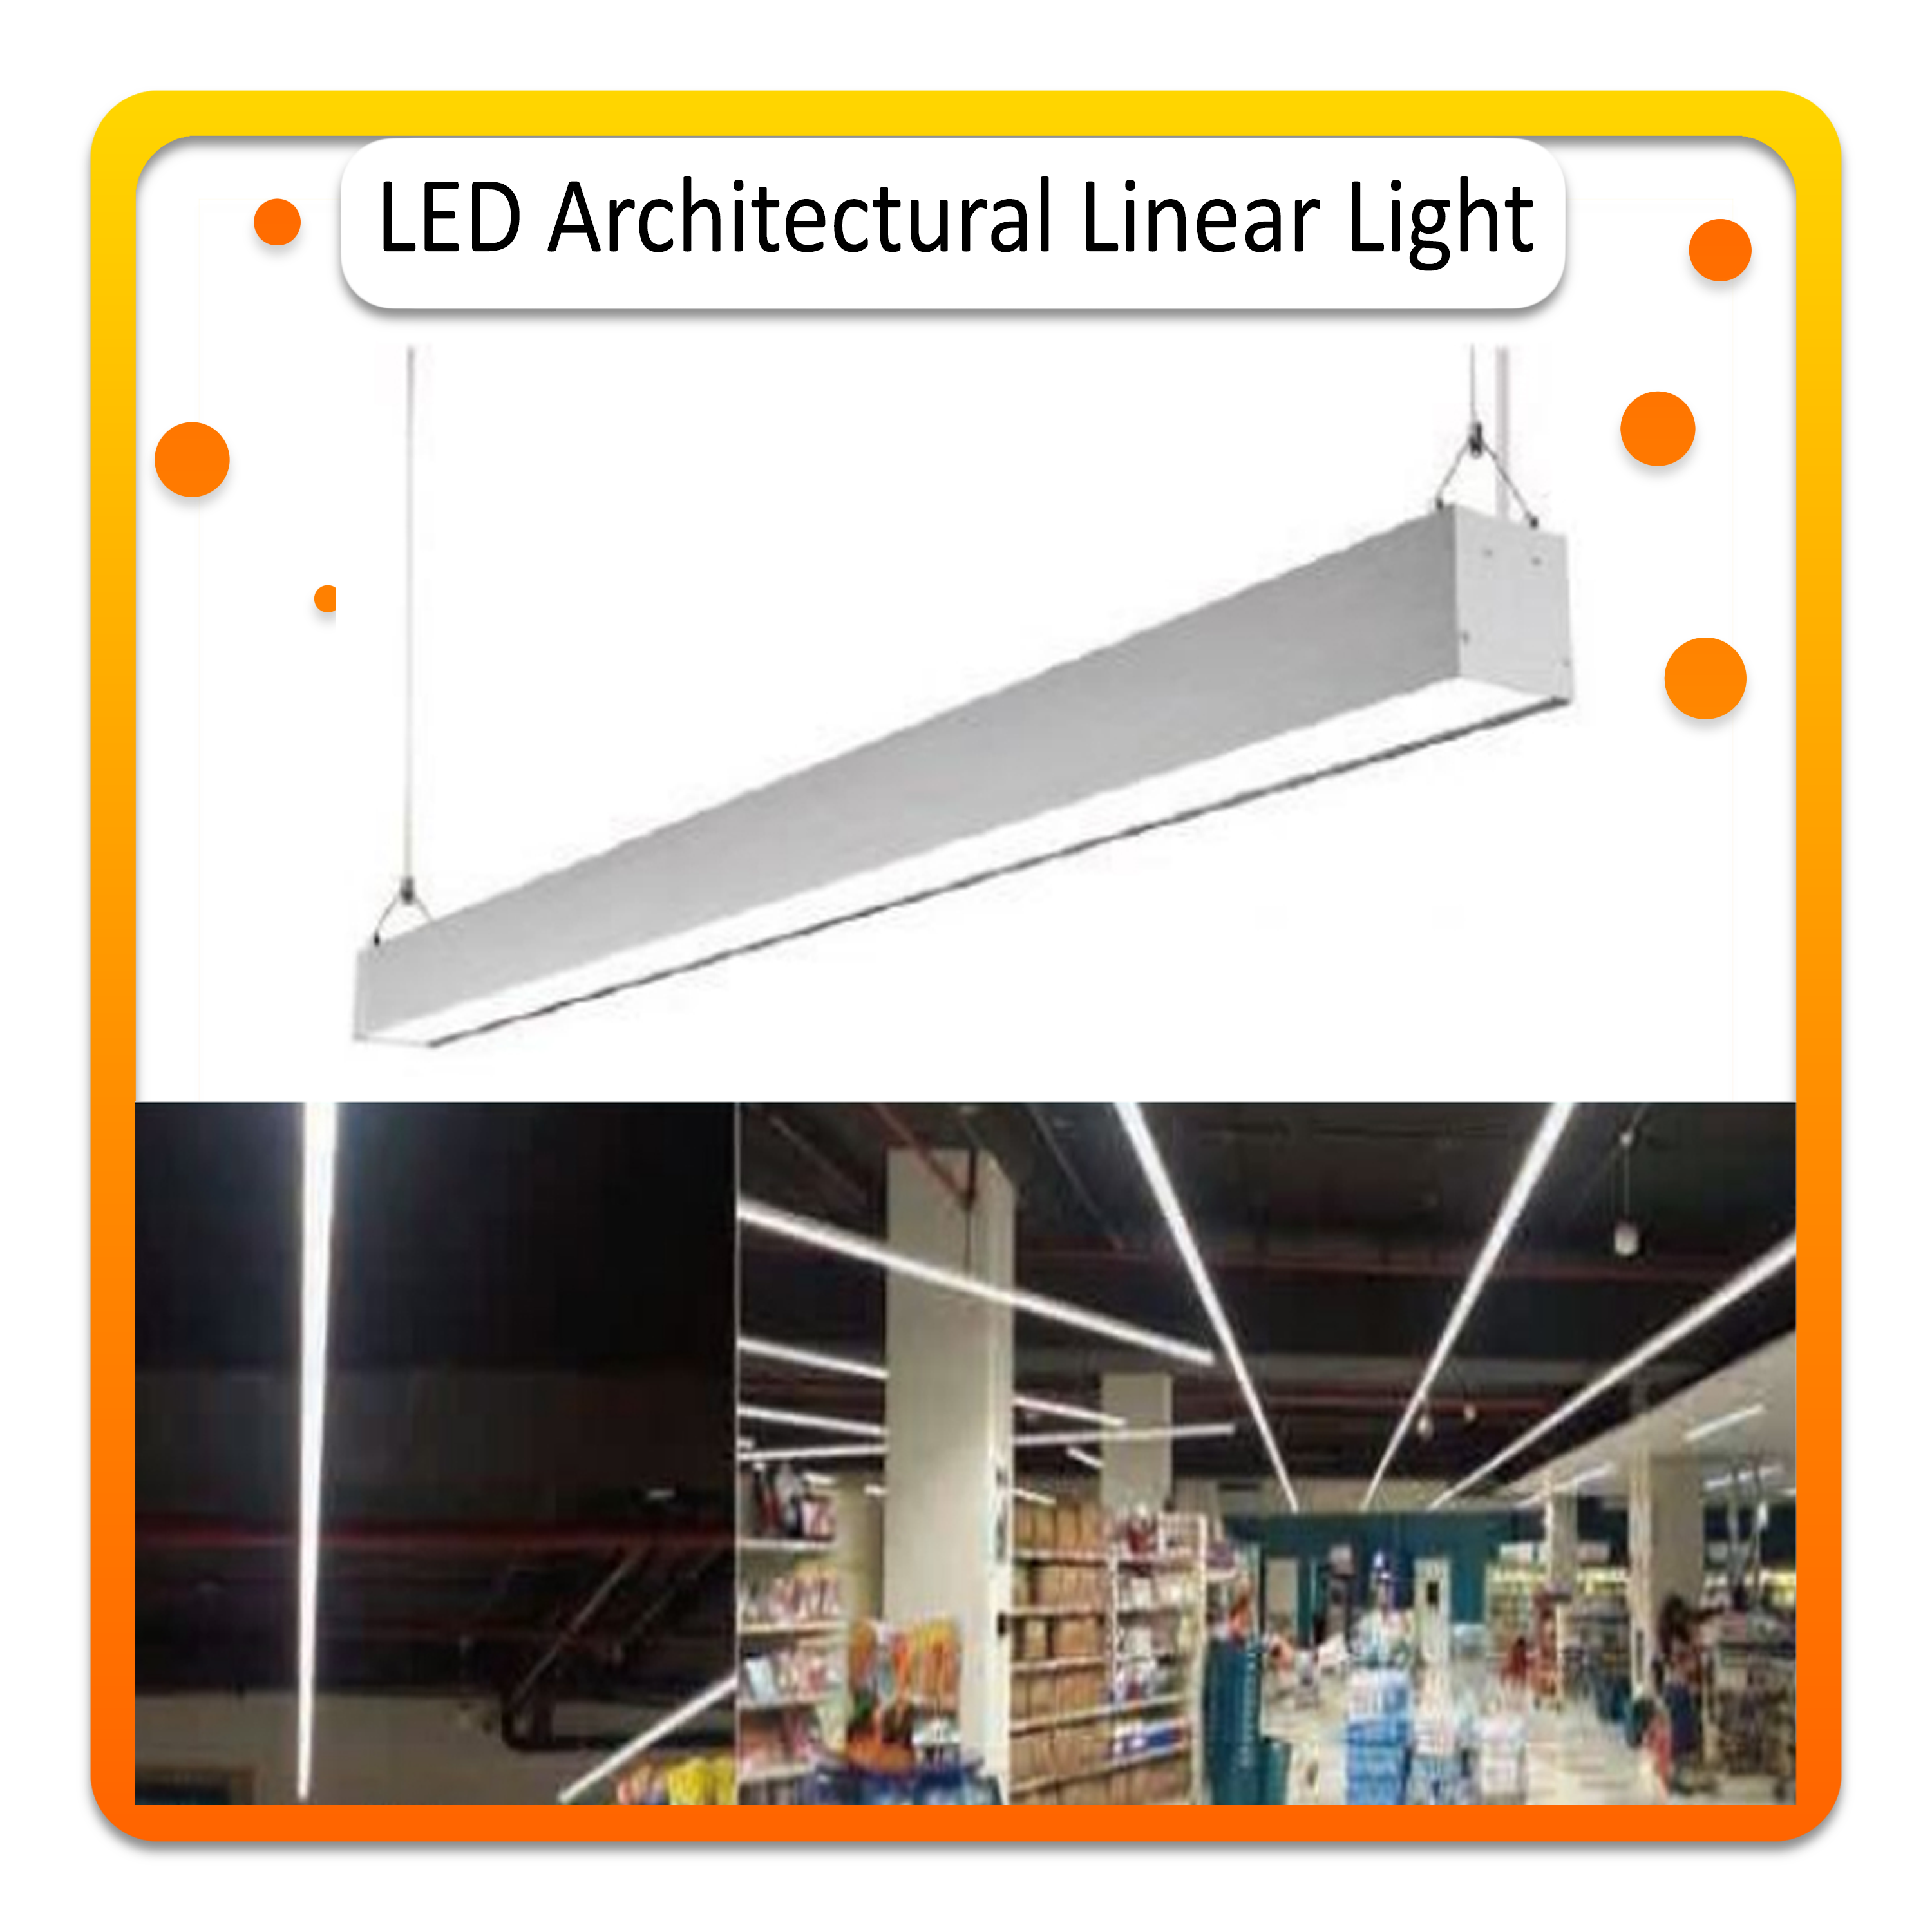 LED Architectural Linear Light.png